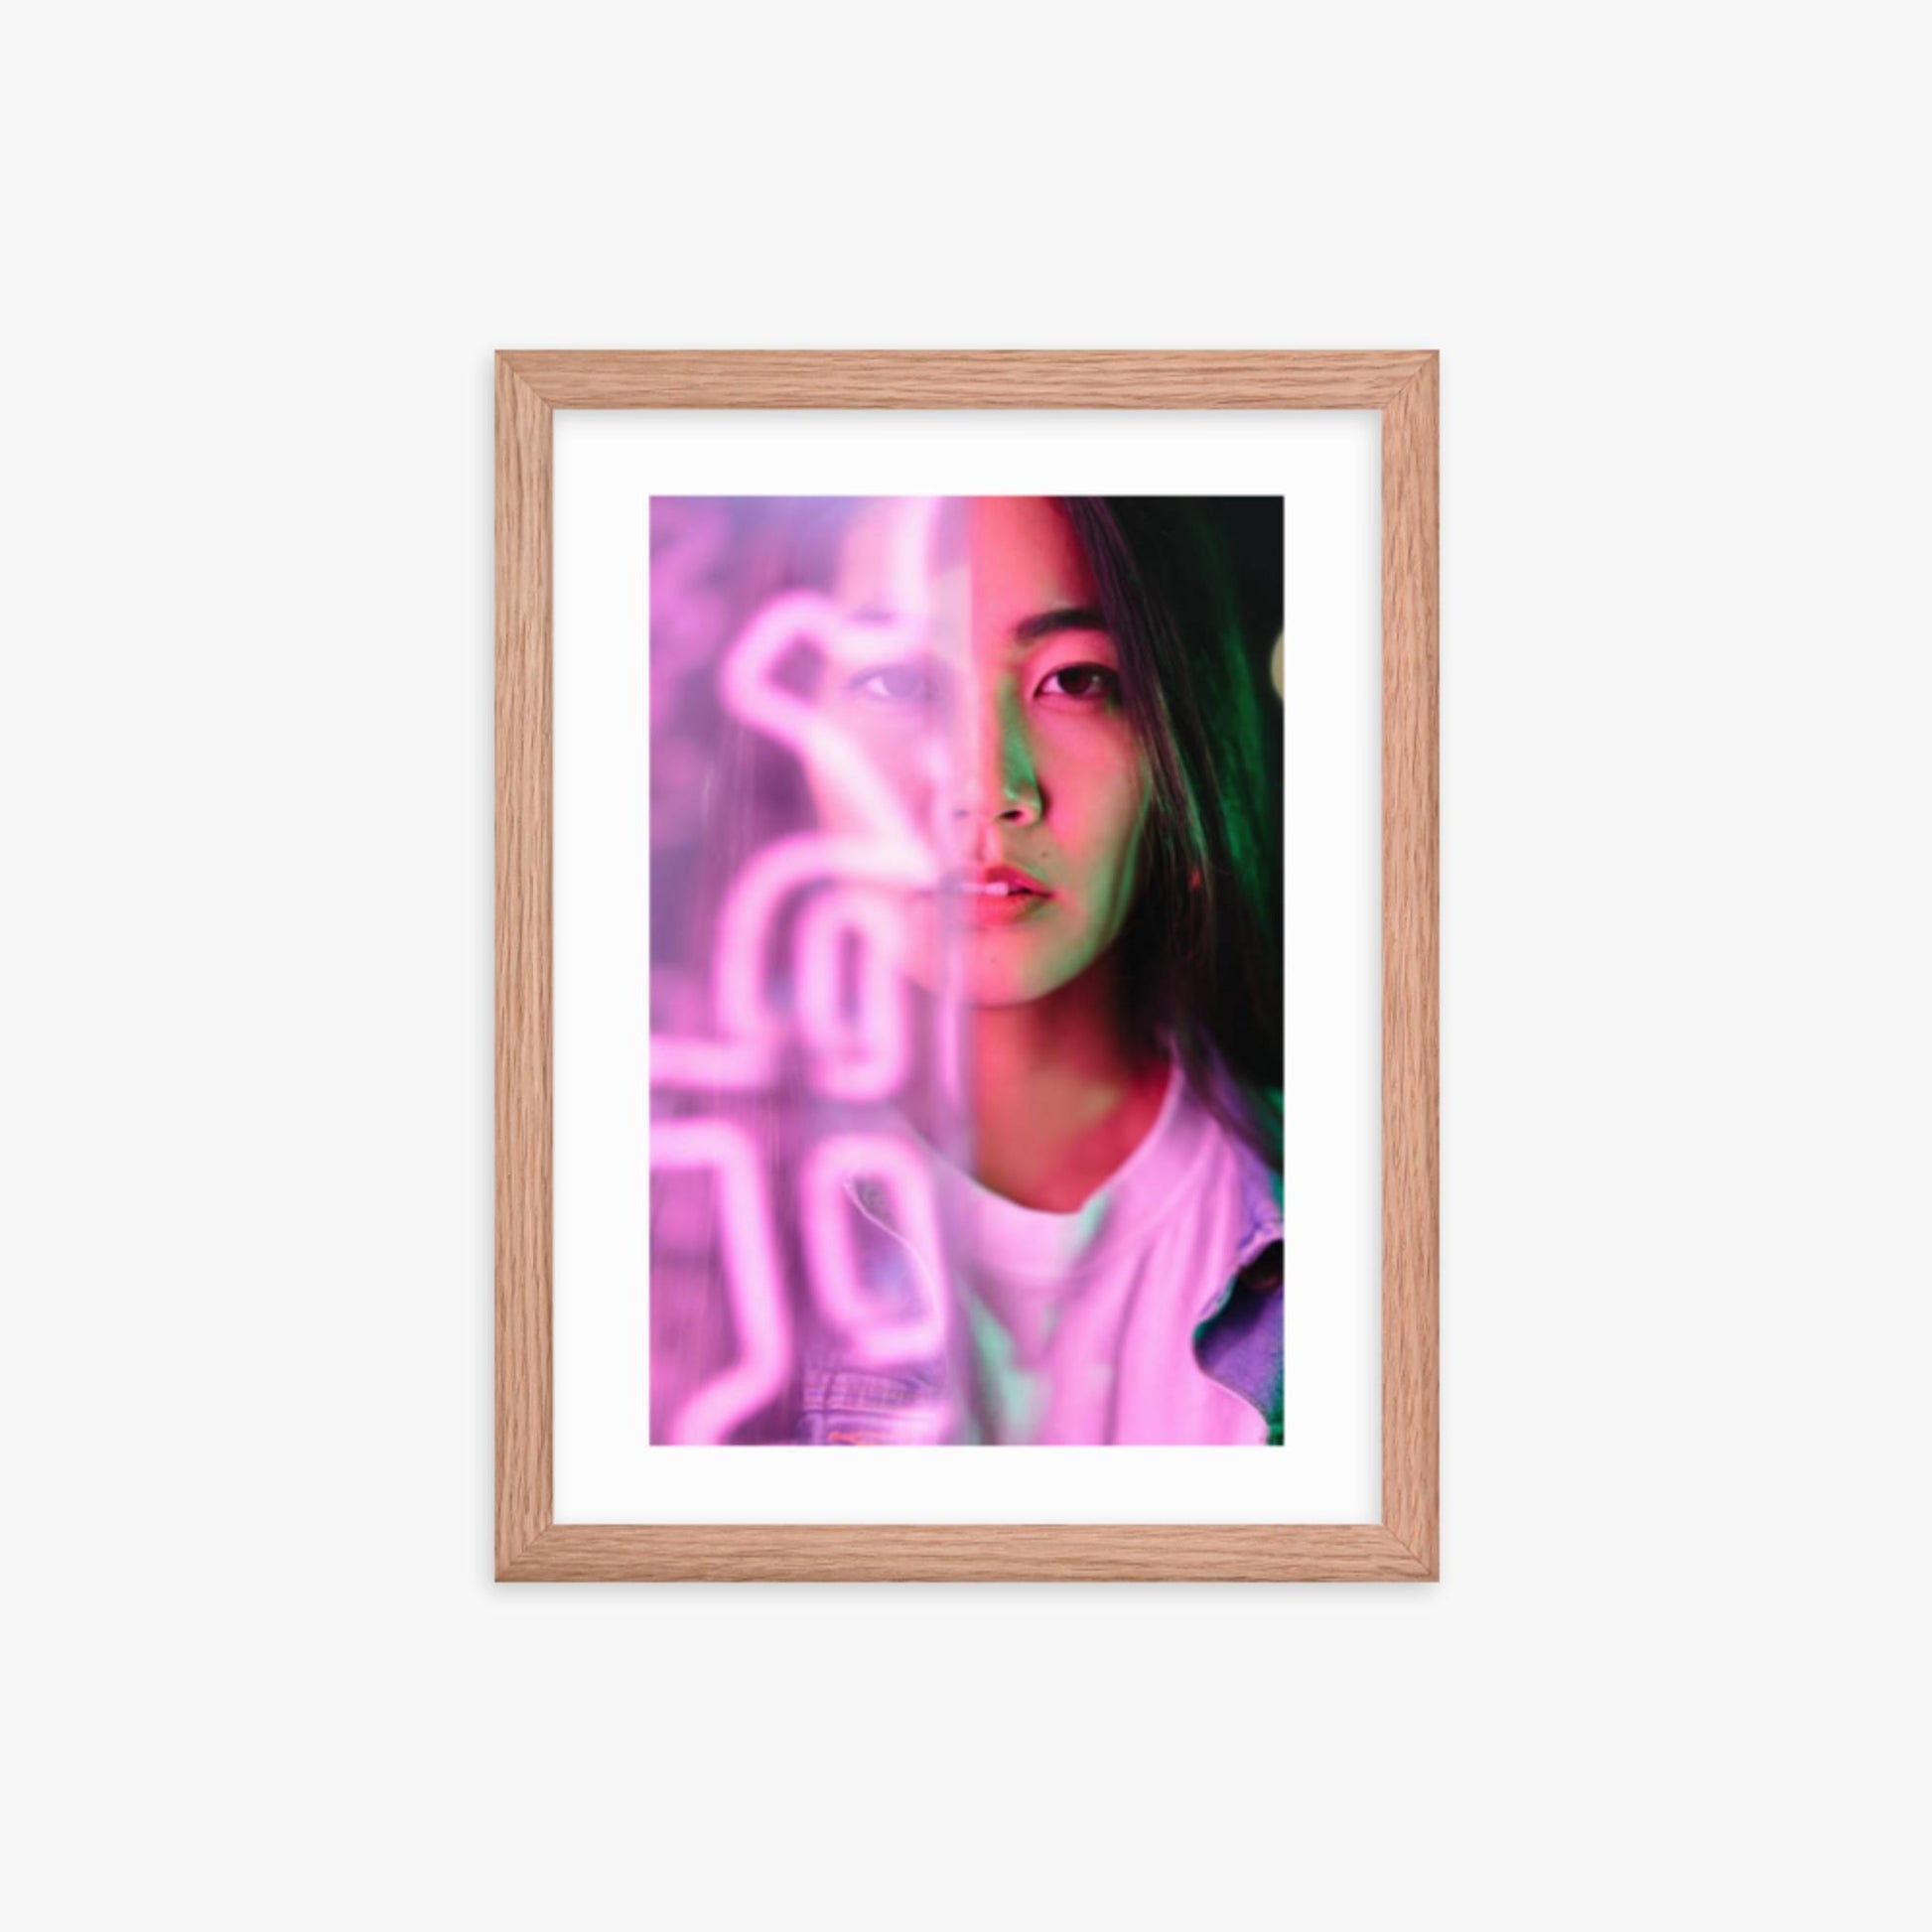 Portrait of young woman lit by pink neon light 12x16 in Poster With Oak Frame